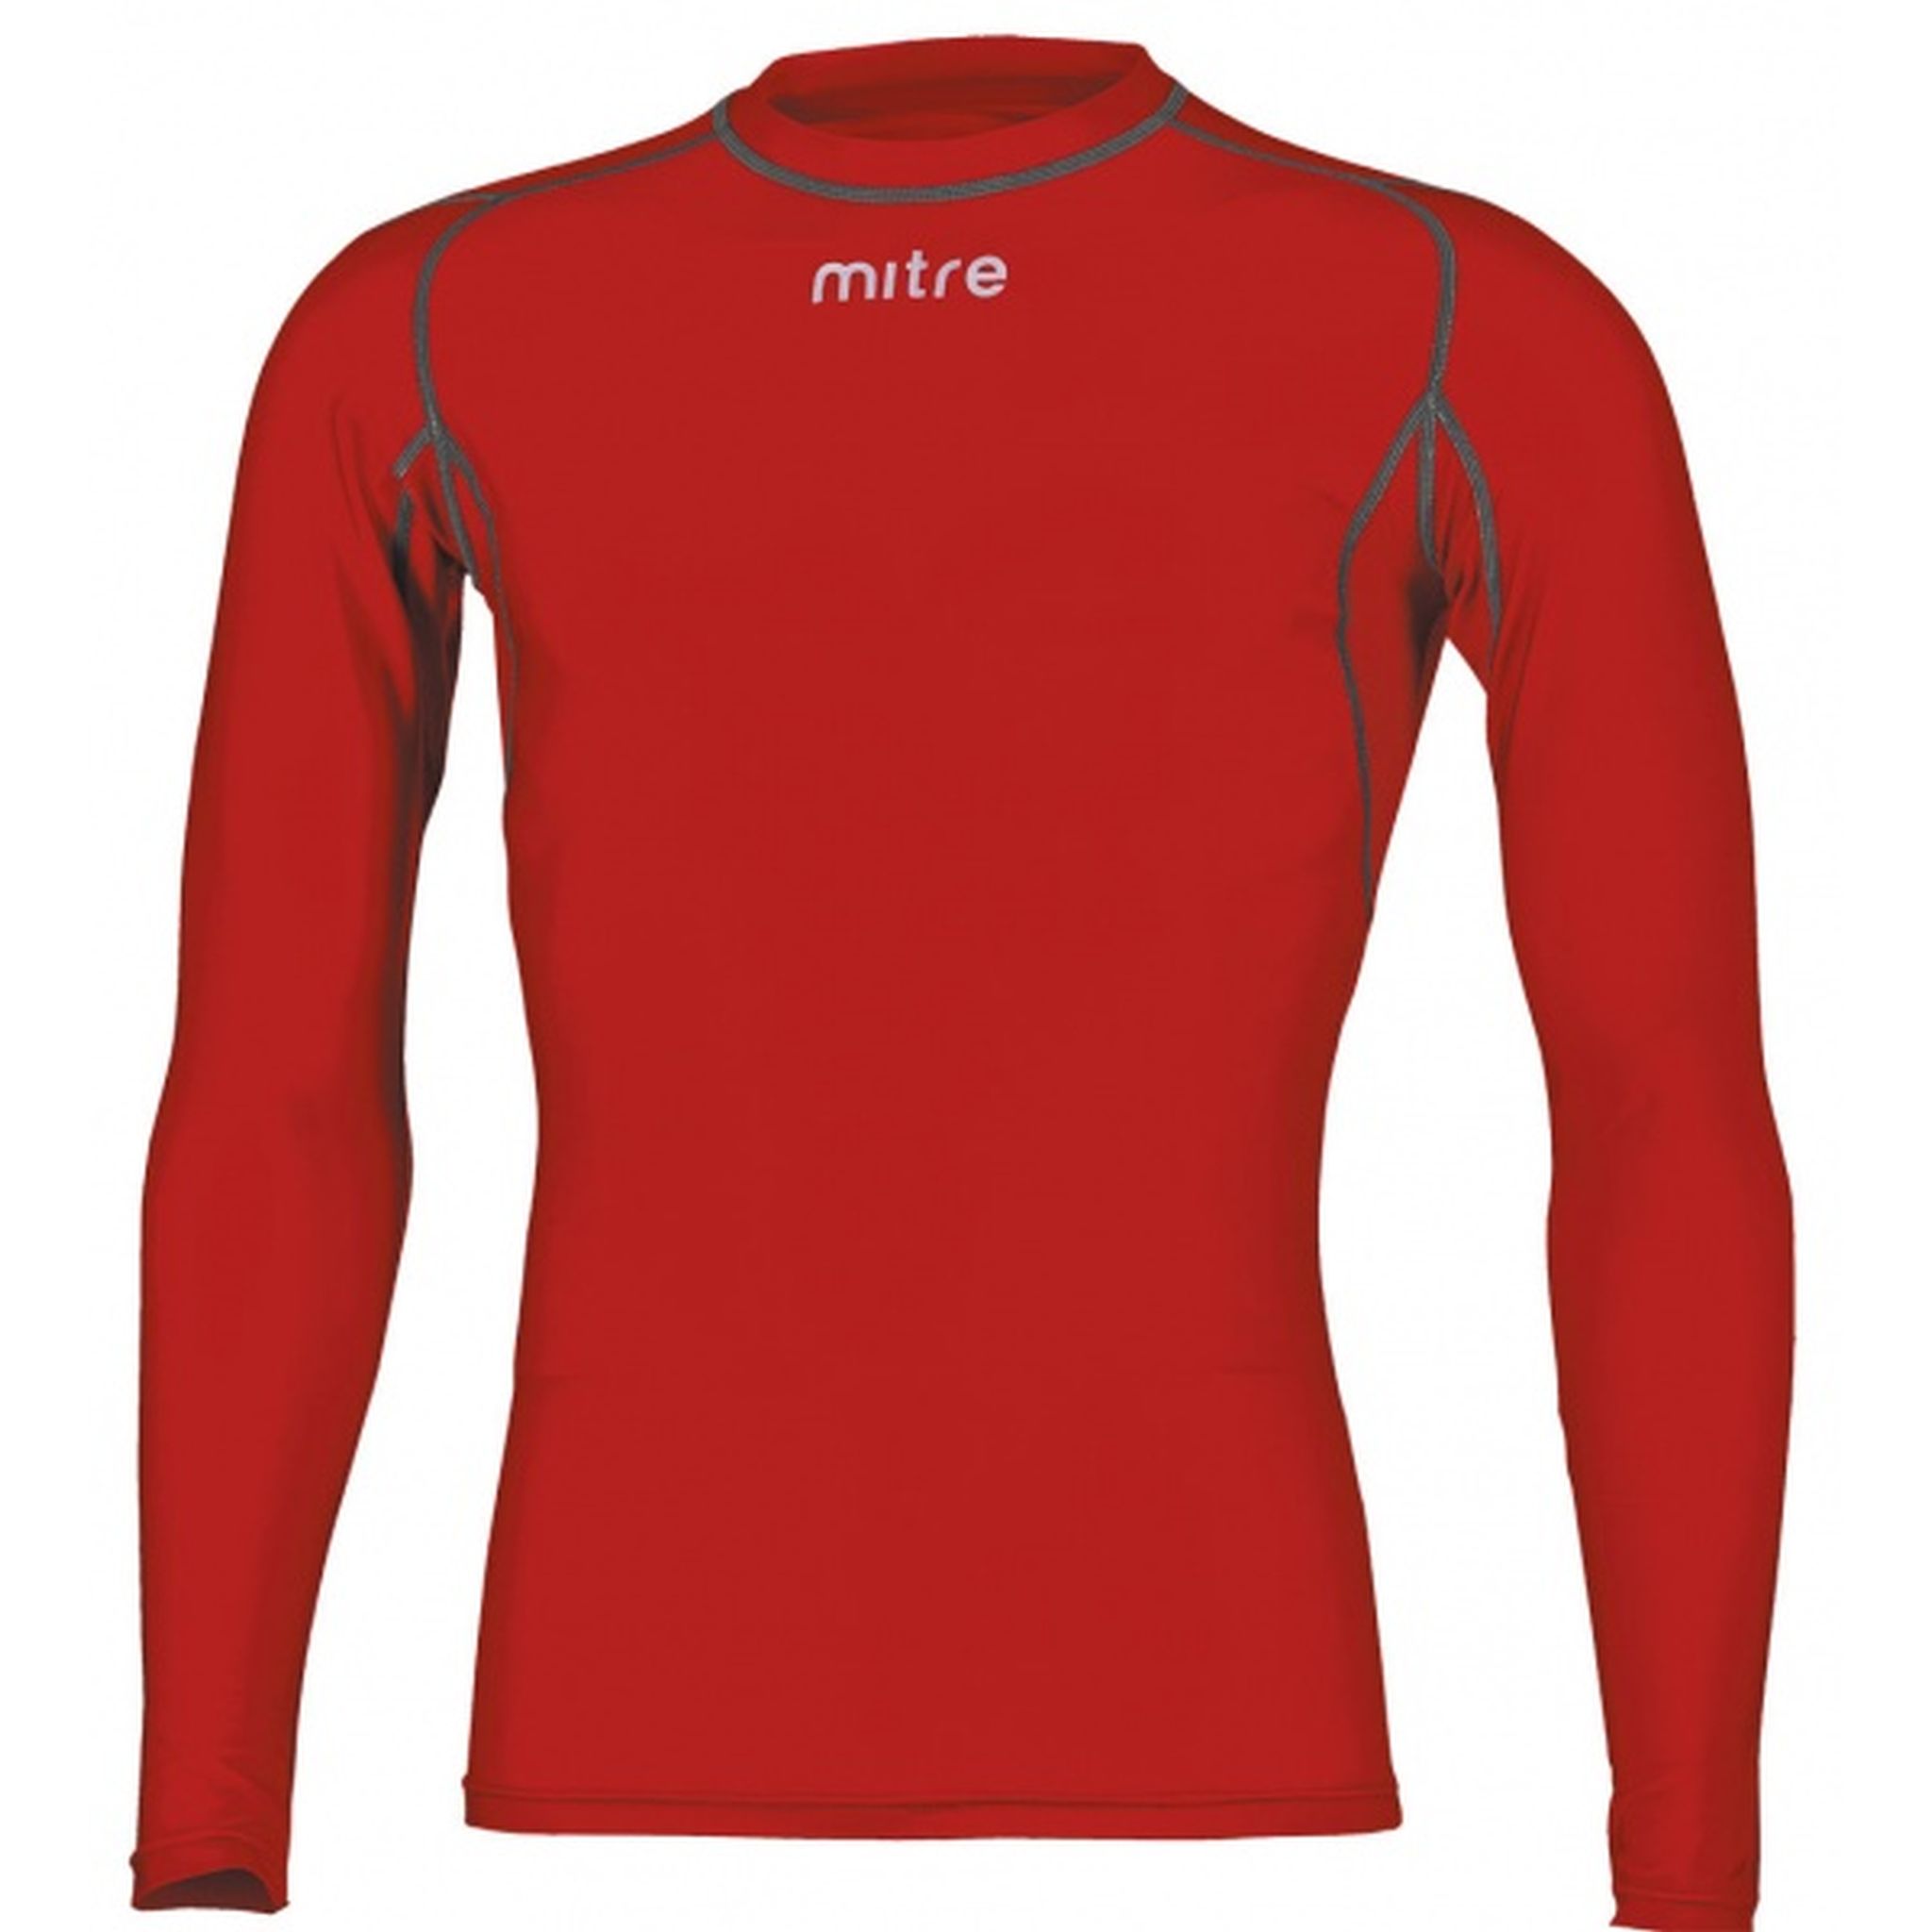 Mitre Youth Neutron Compression Long Sleeve Top